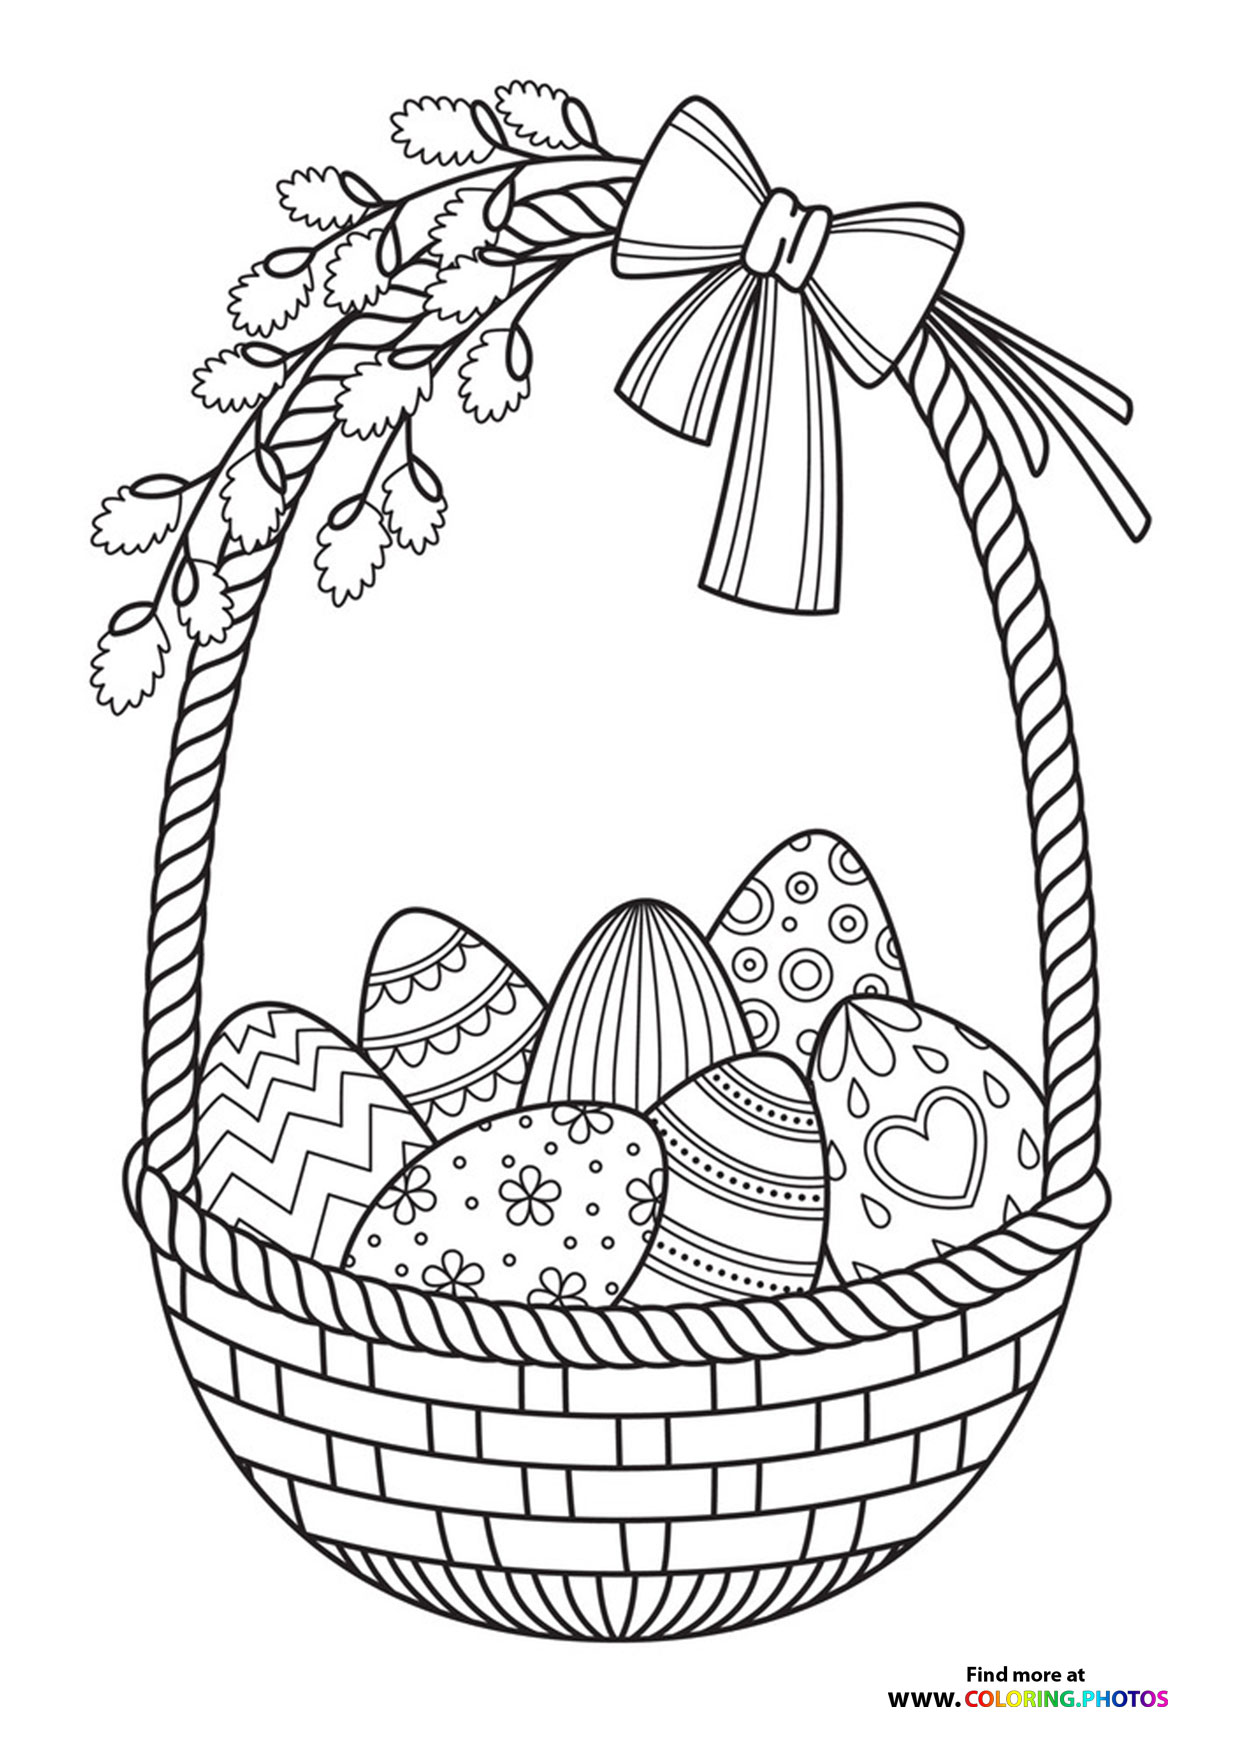 easter-baskets-coloring-pages-for-kids-free-and-easy-print-or-download